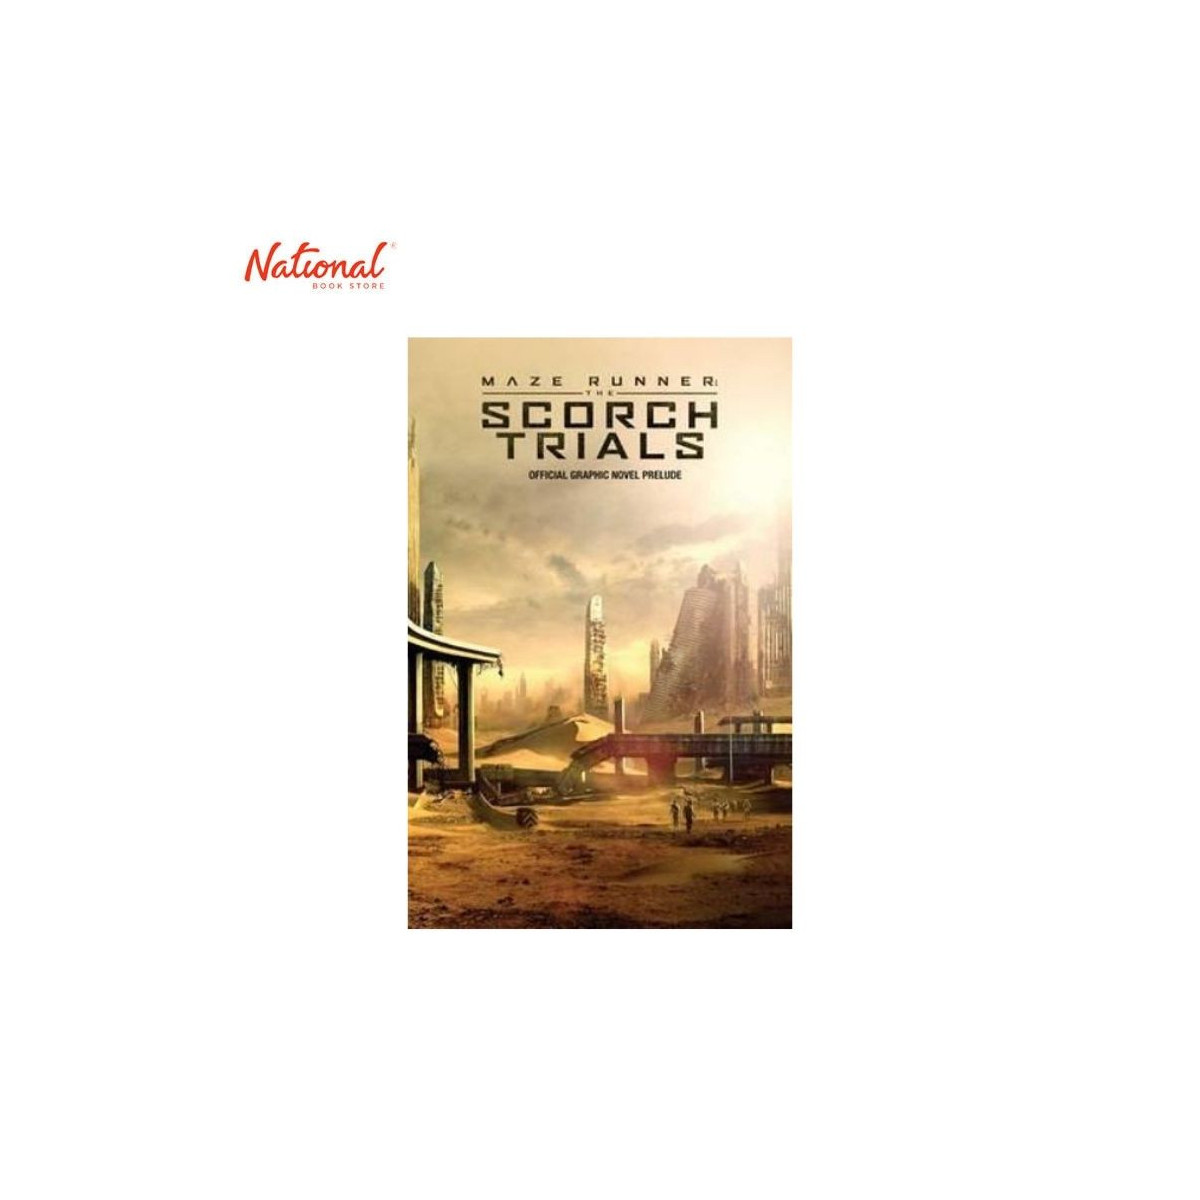 Maze Runner: The Scorch Trials Trade Paperback by Jackson Lanzing